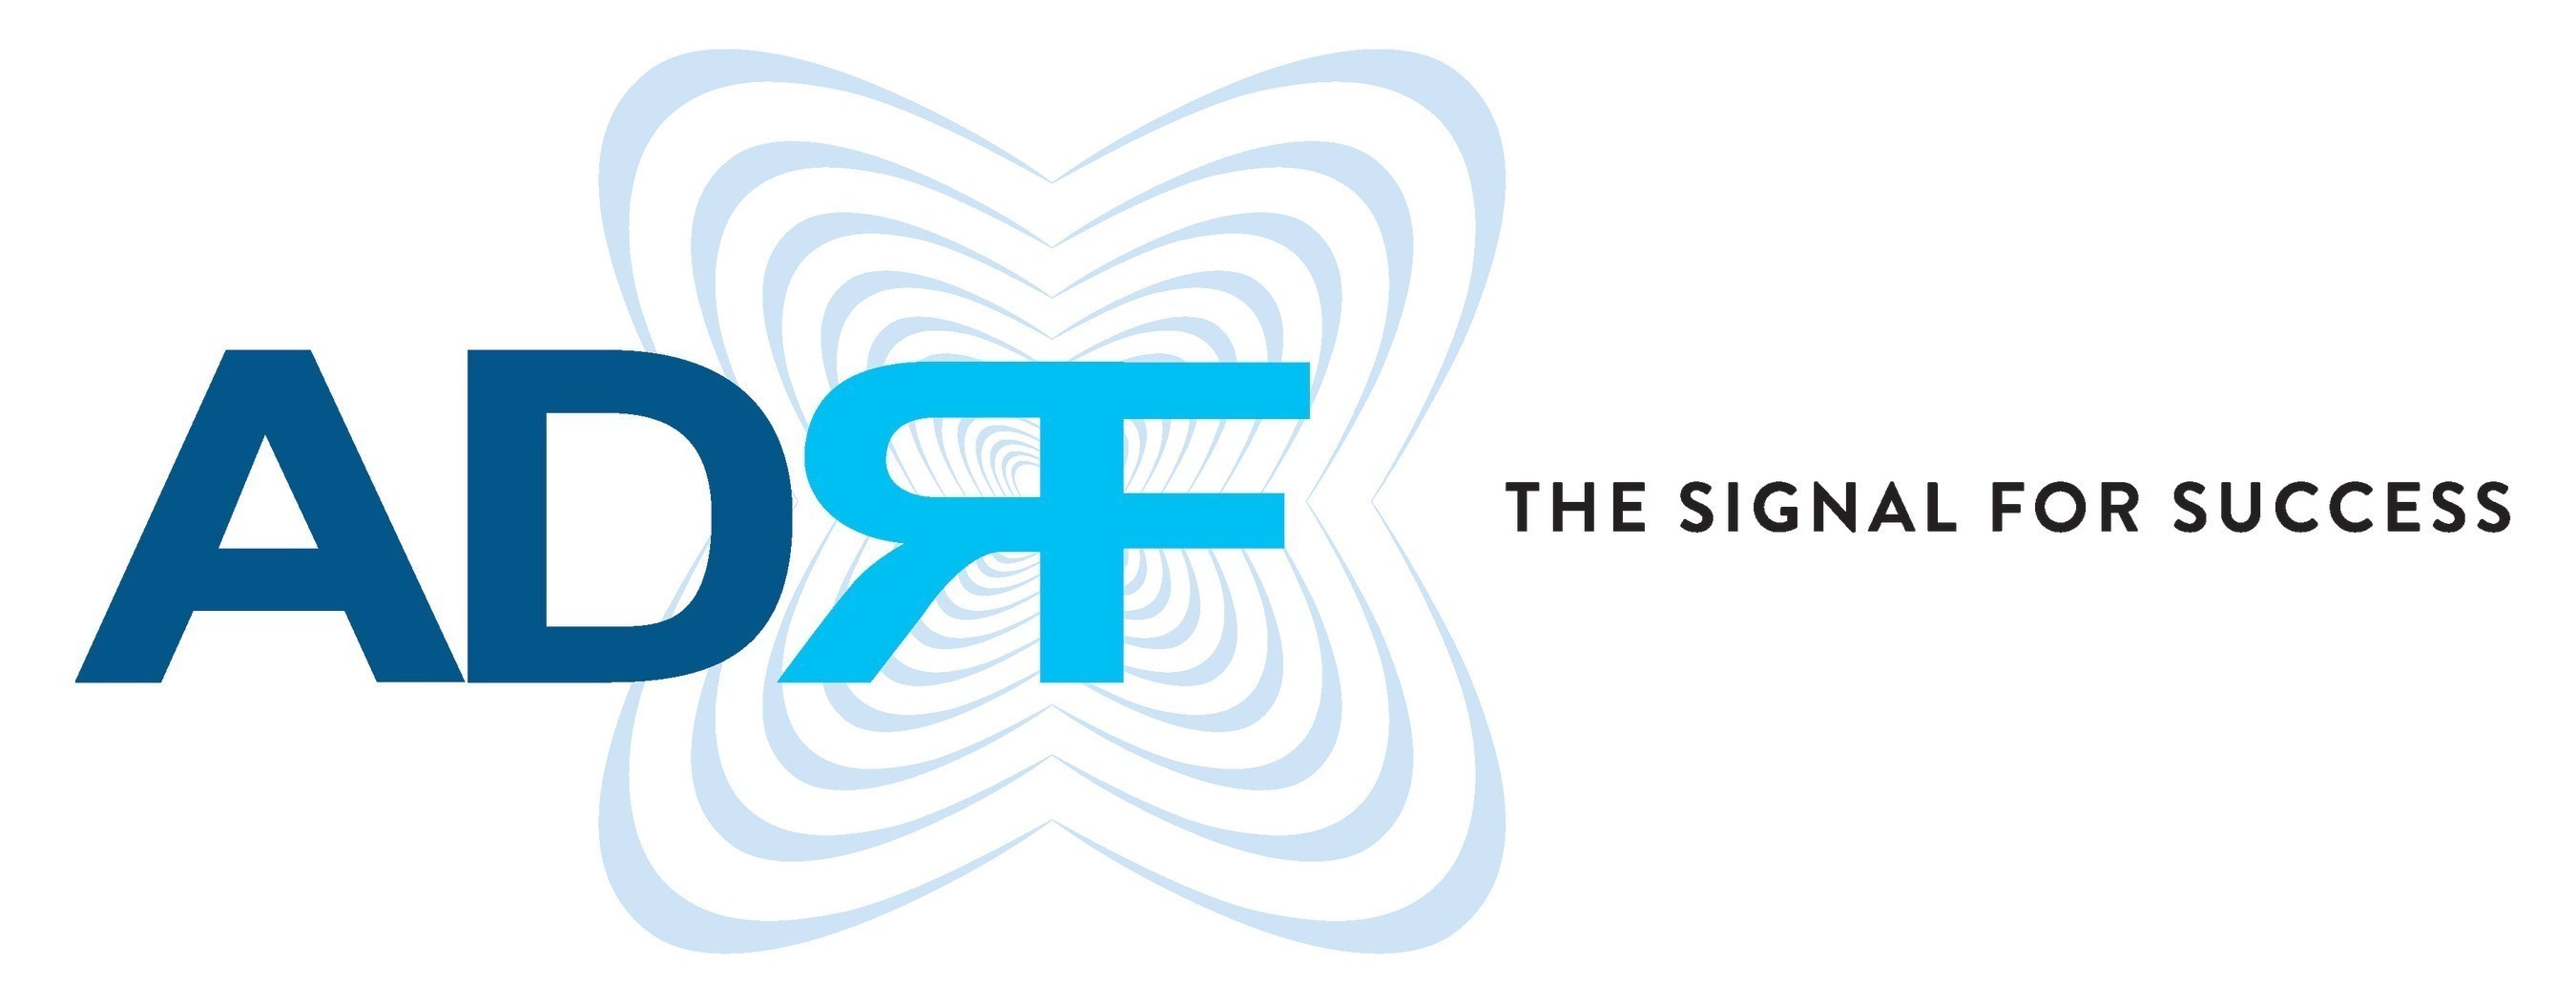 ADRF - The Signal For Success